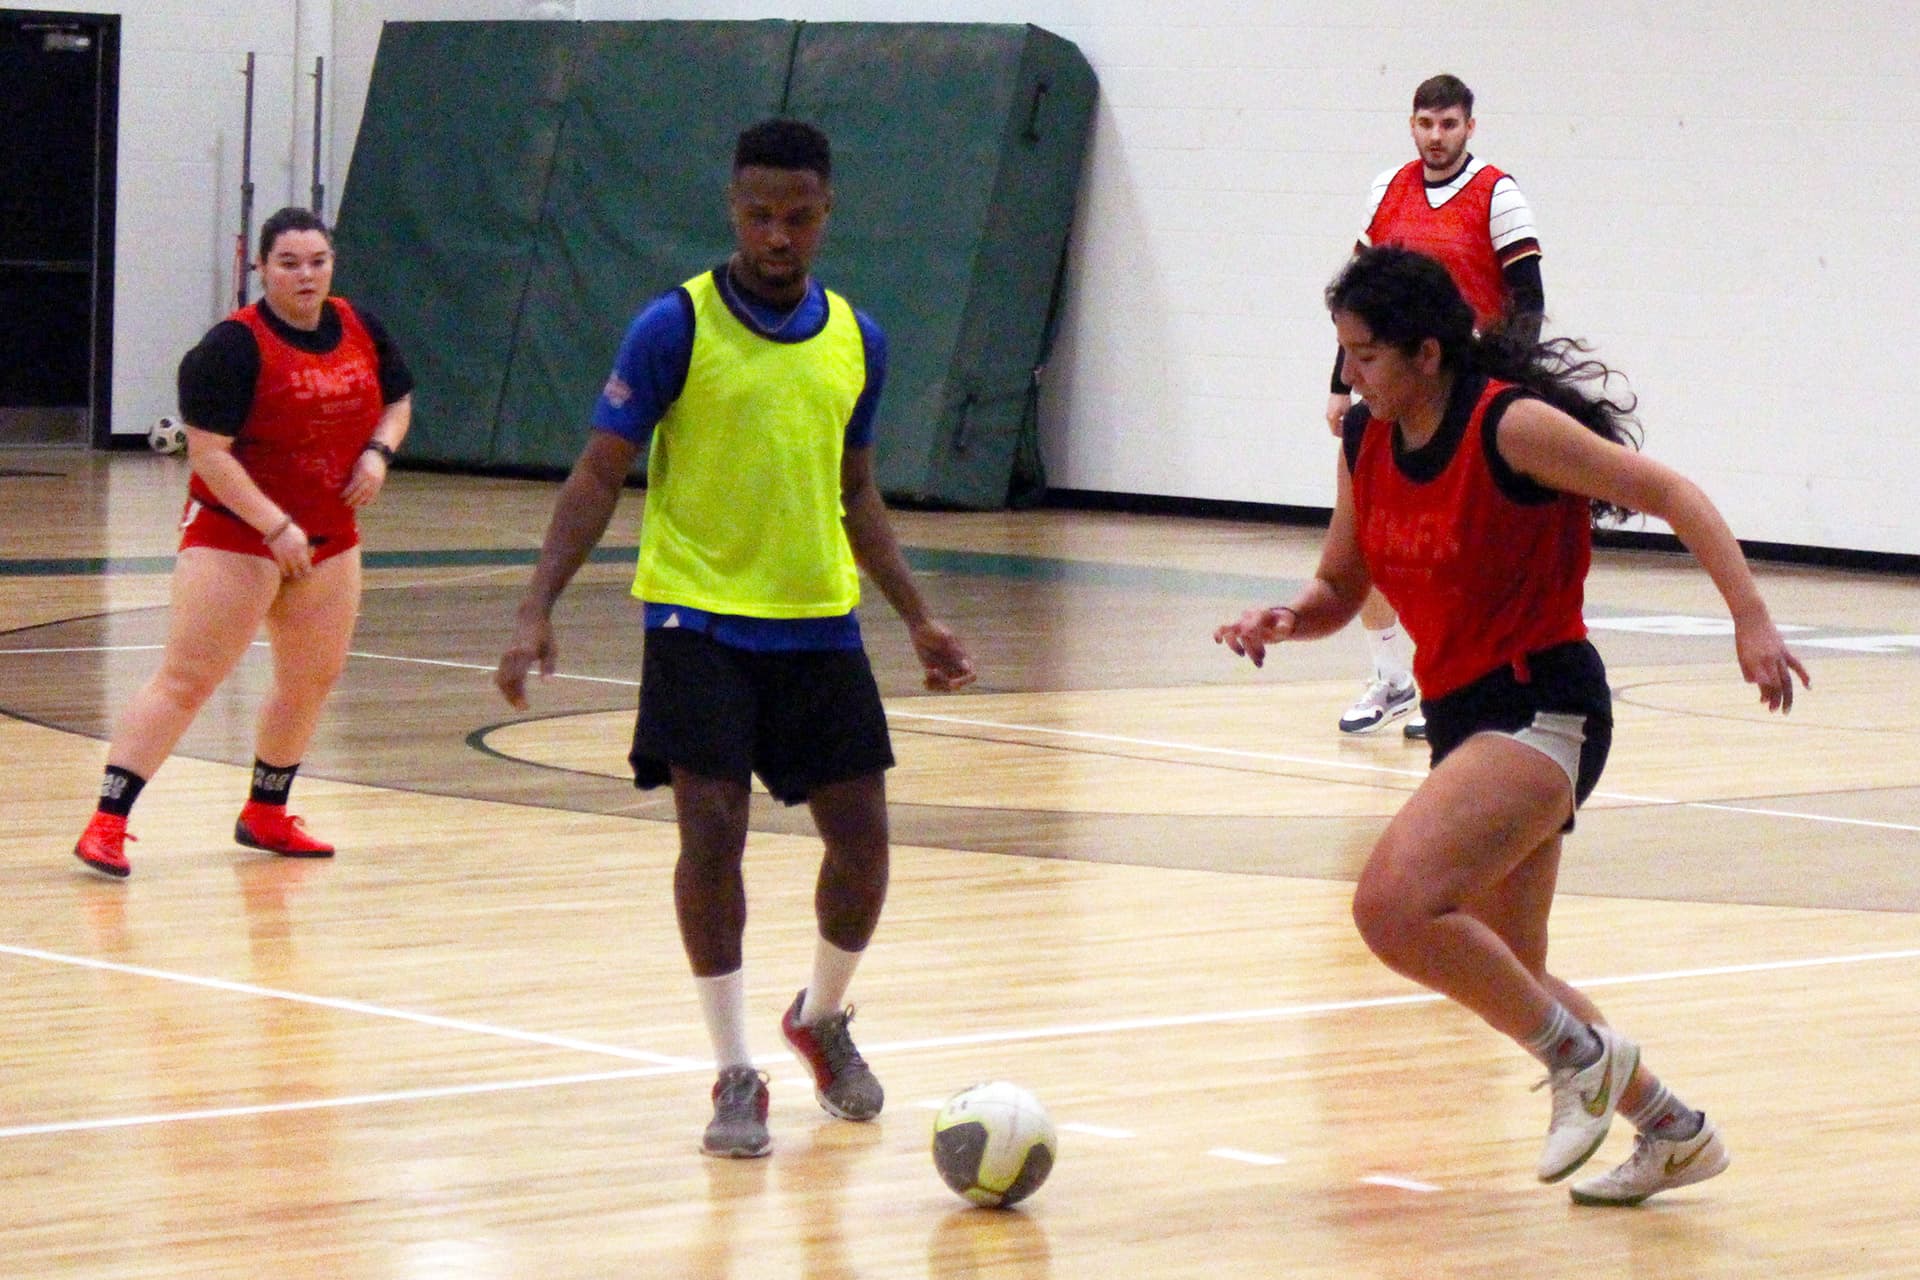 A group of UMFK students play indoor soccer, with each team wearing different colored jerseys